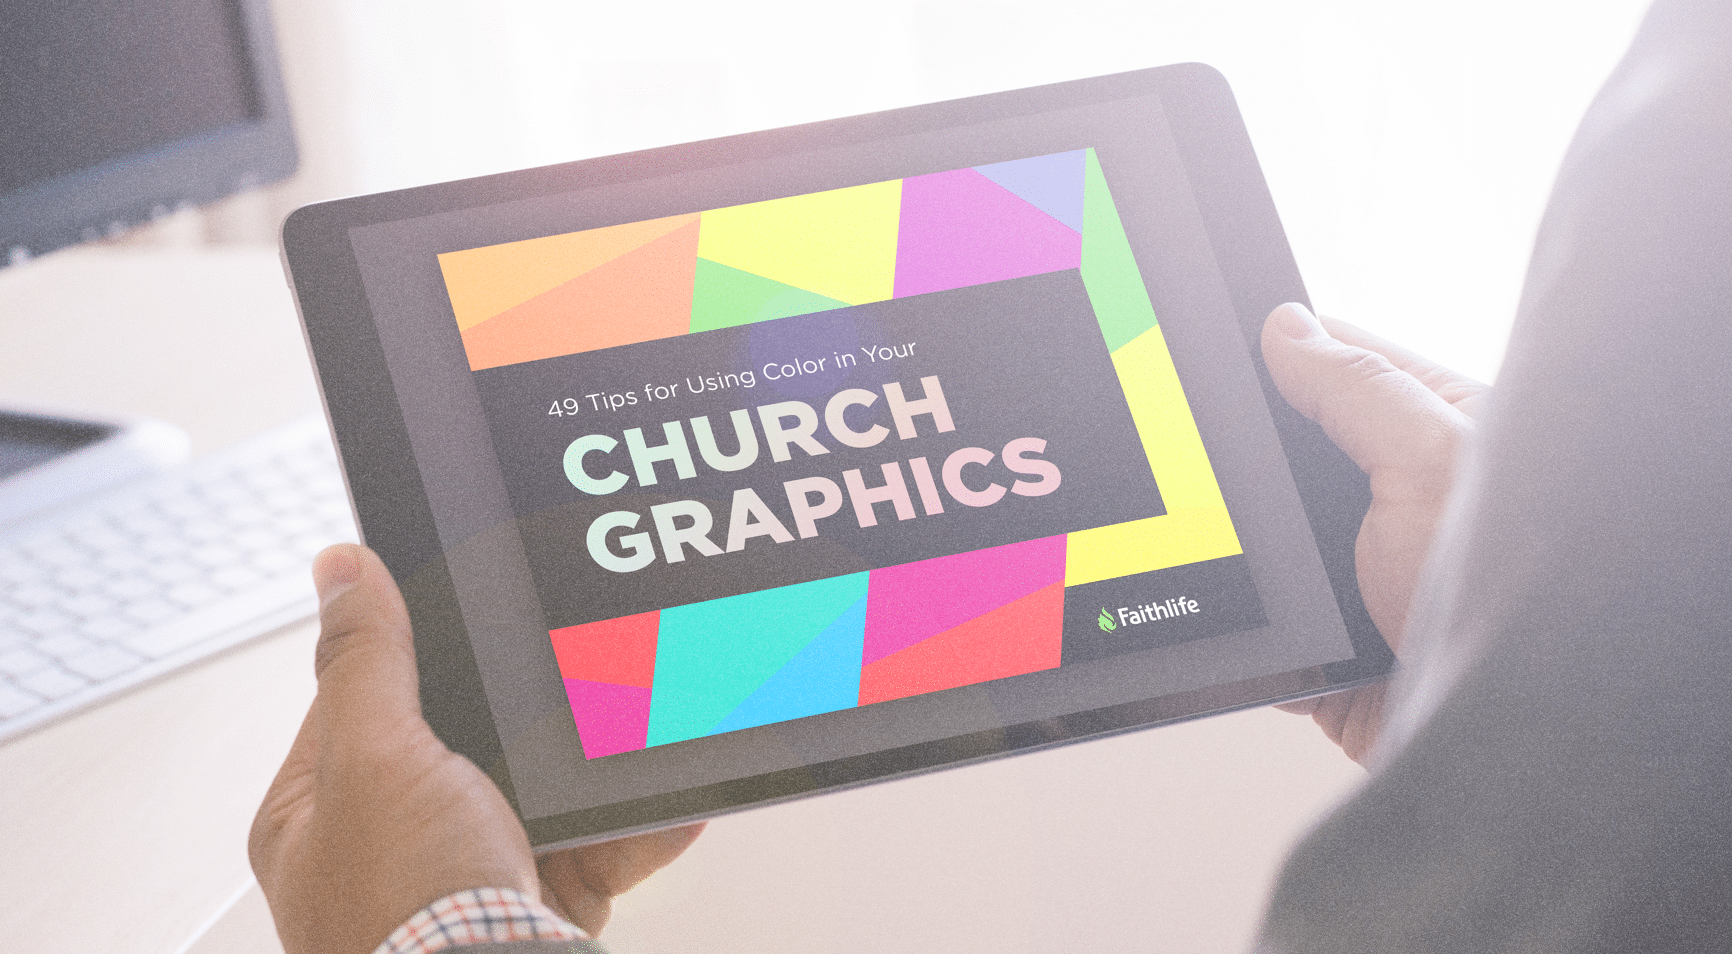 49 Tips for Using Color in Your Church Graphics